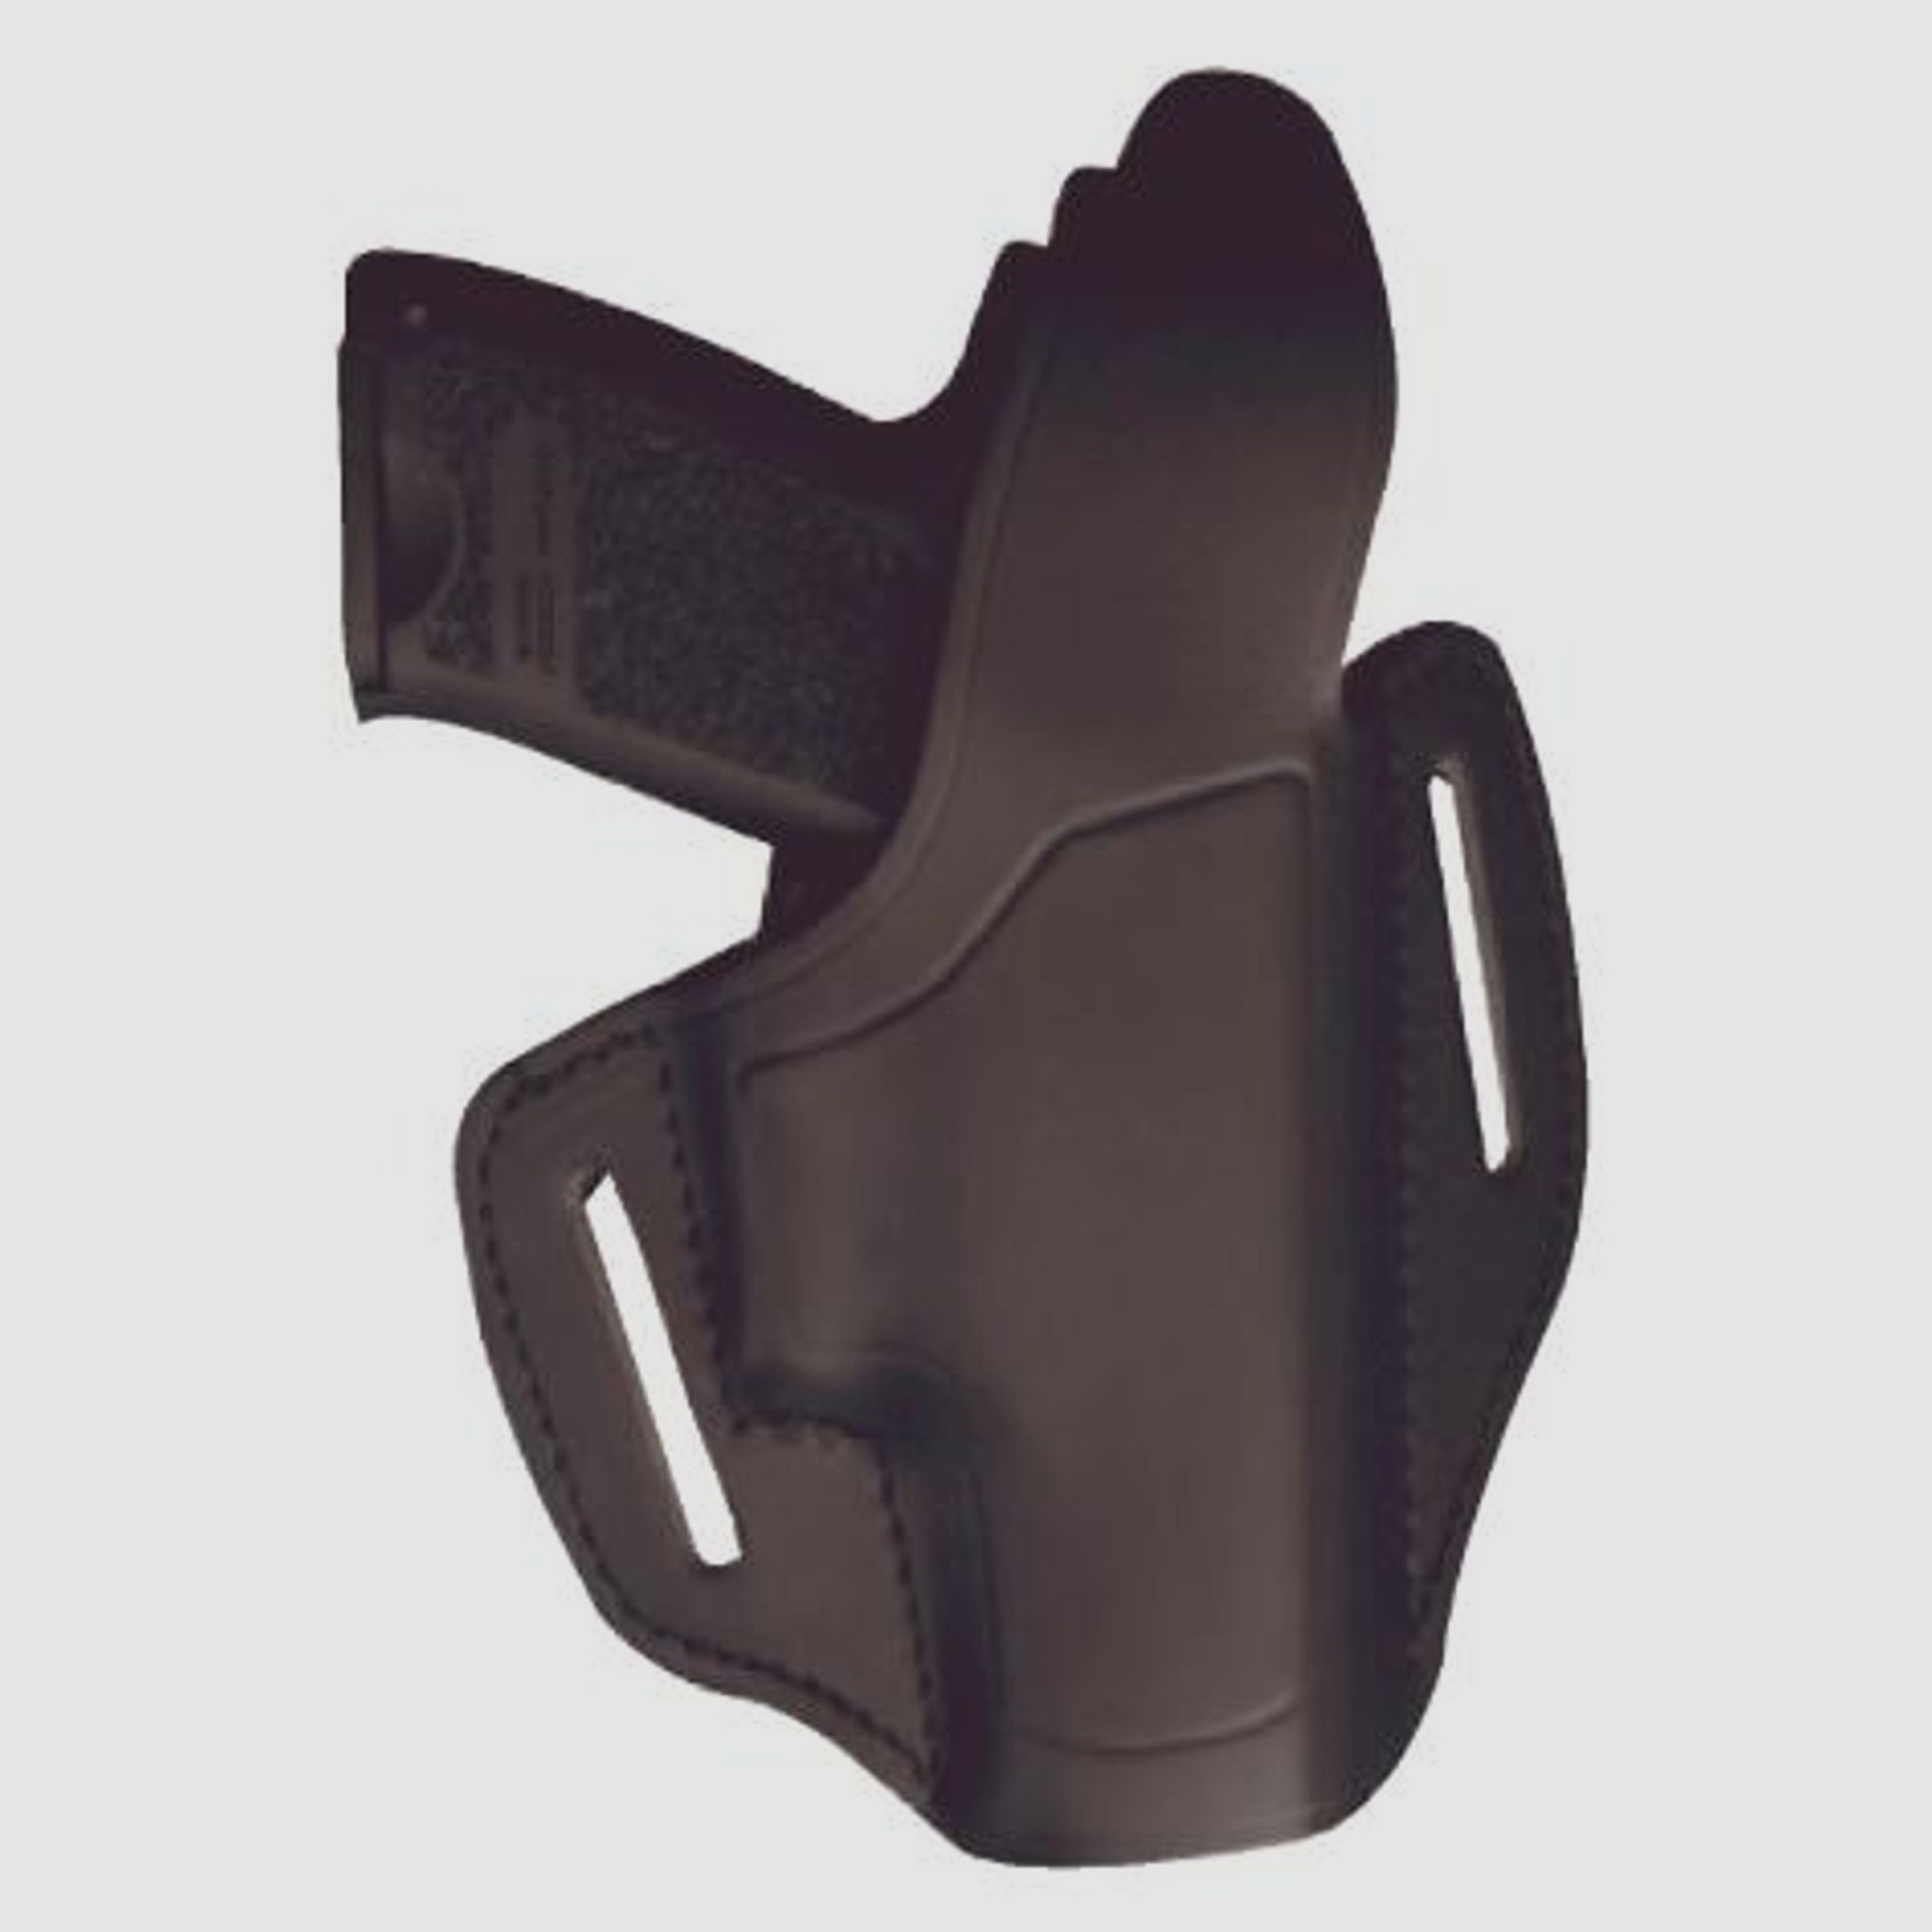 AKAH Holster (Leder) f. Walther P99 Quickmat